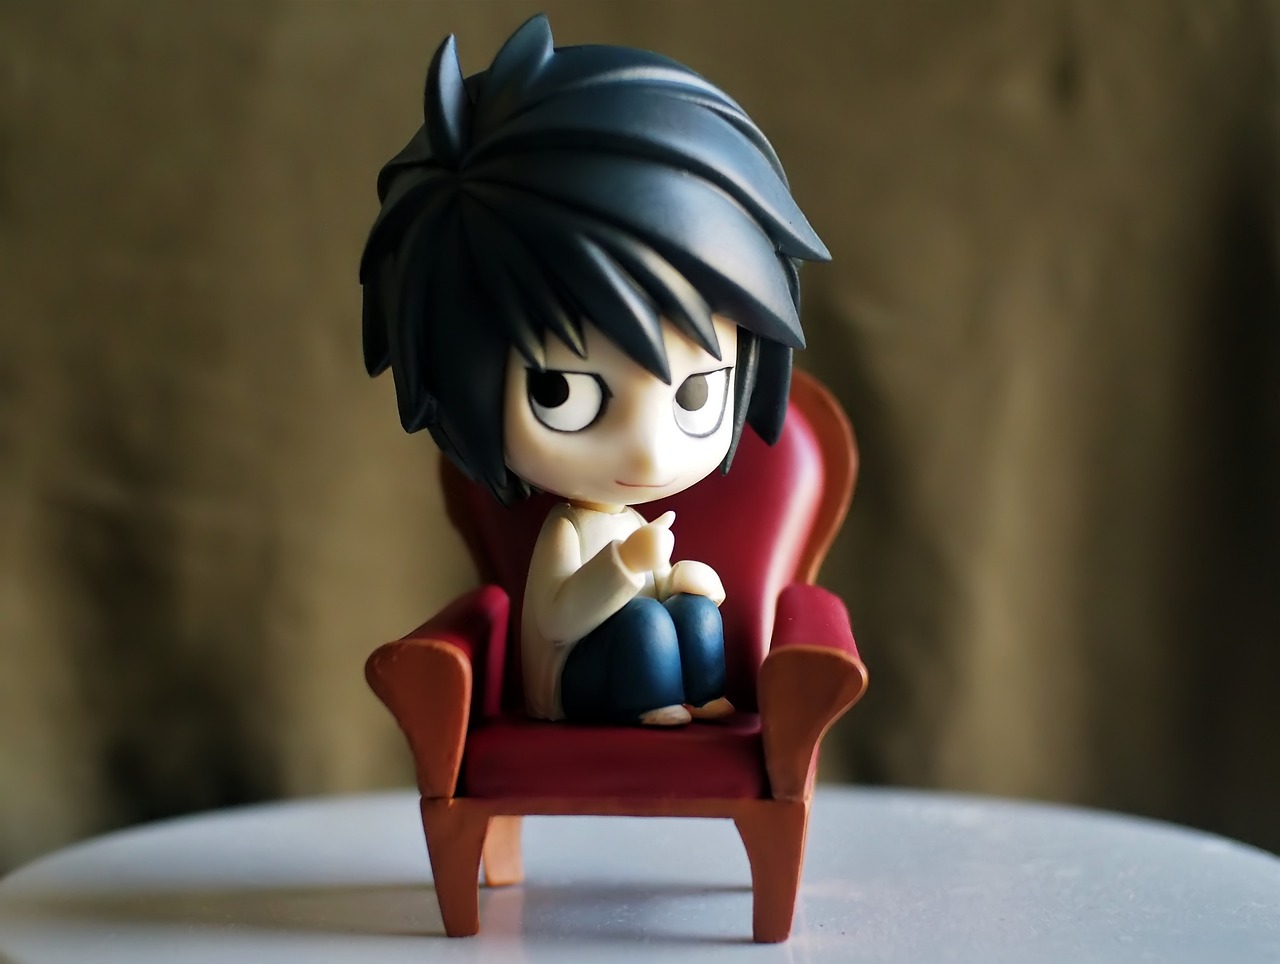 a figurine of a person sitting in a chair, a picture, inspired by Takeshi Obata, pixiv, vanitas, toy commercial photo, l · lawliet, toy photo, bashful expression